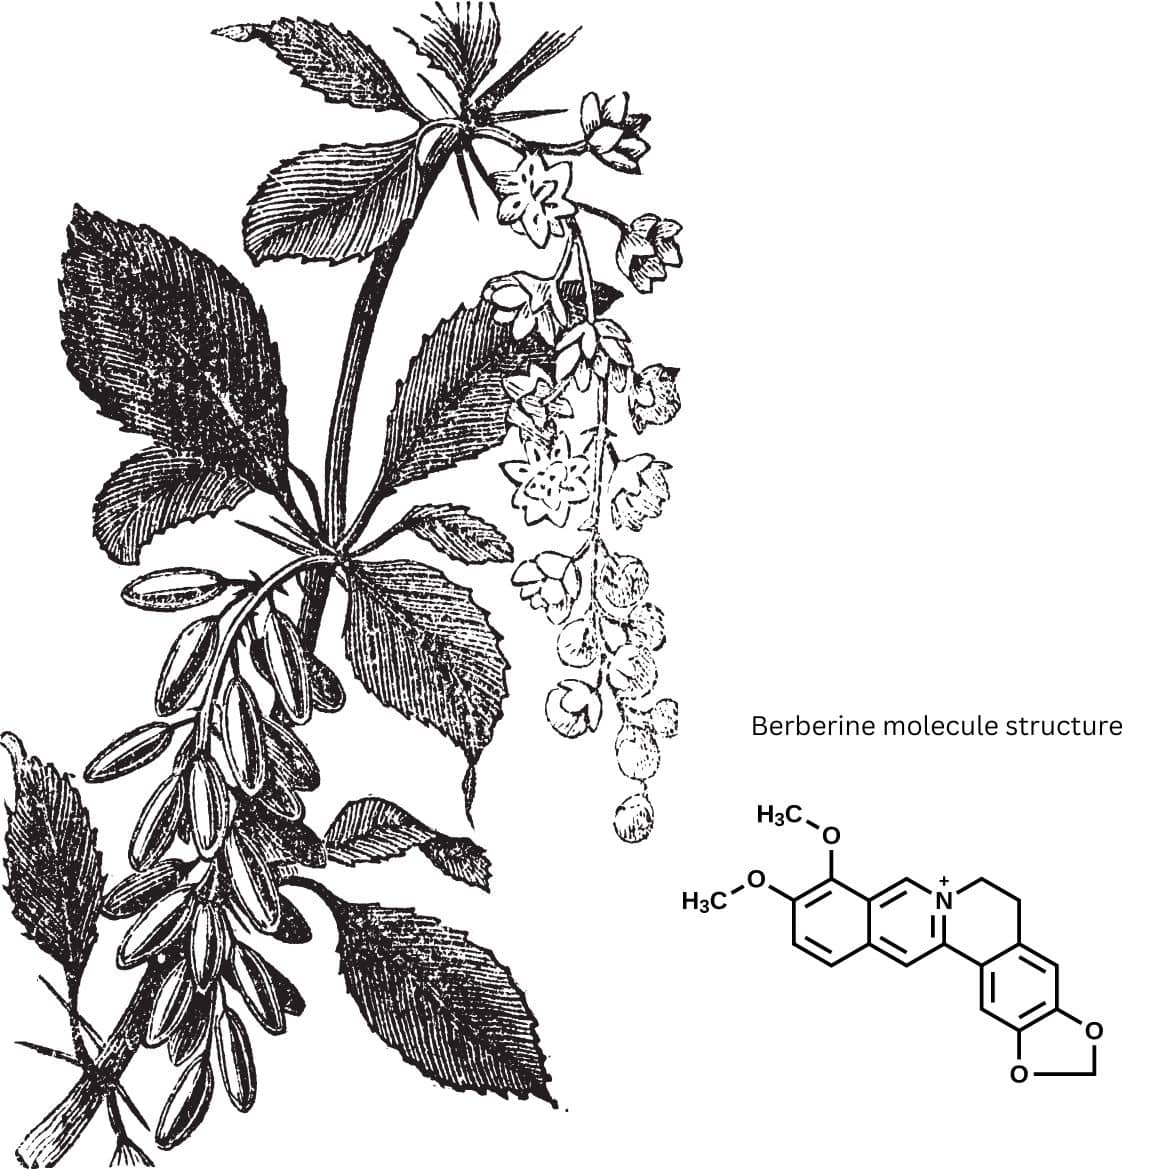 Illustration of a Berberine molecule interlaced with Ayurvedic and Chinese herbs, symbolizing ancient and modern medicine